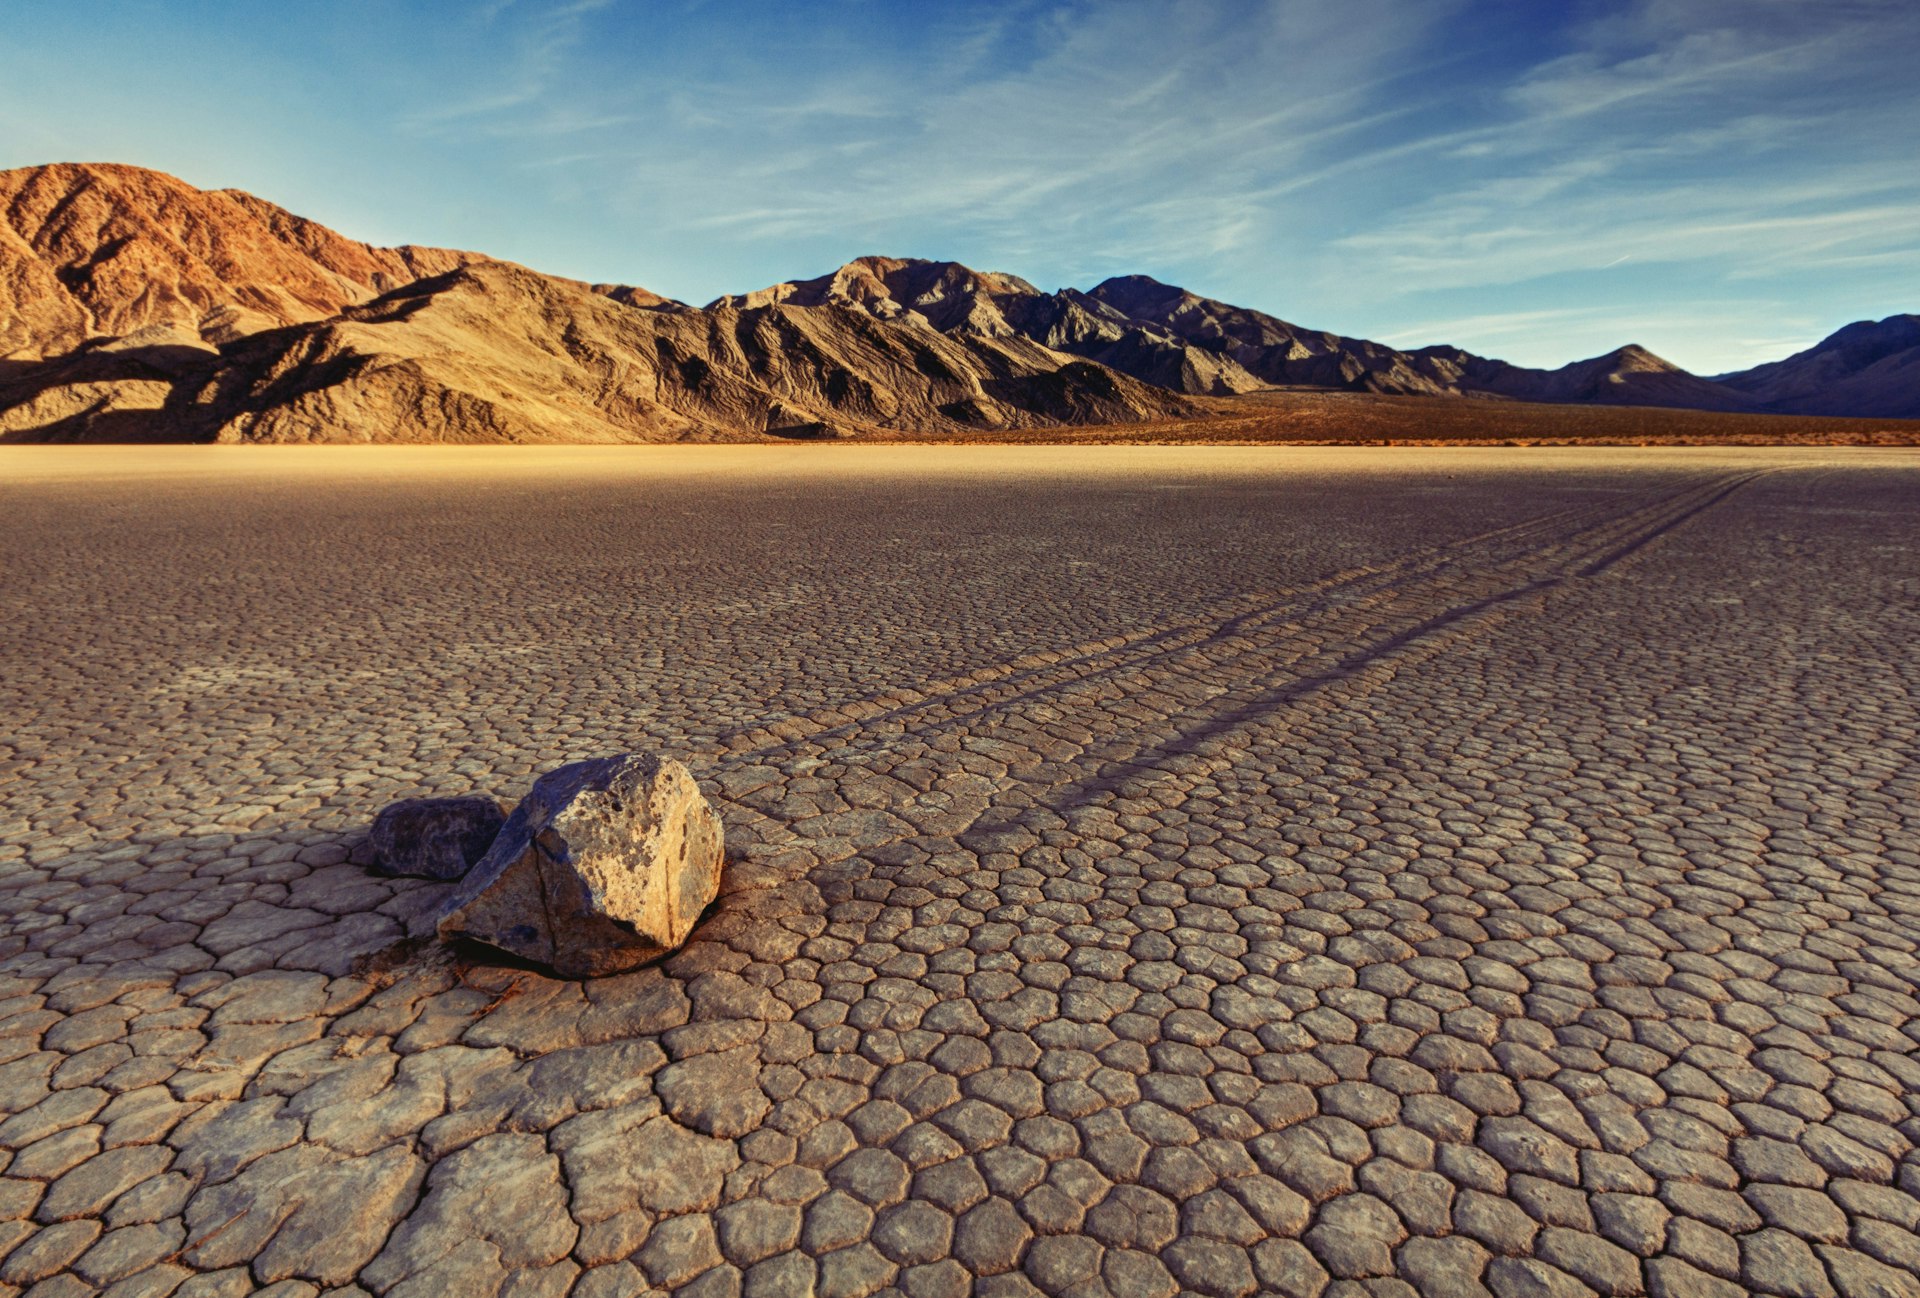 Sailing stones and their paths on the floor of The RaceTrack Playa in Death Valley National Park in California.